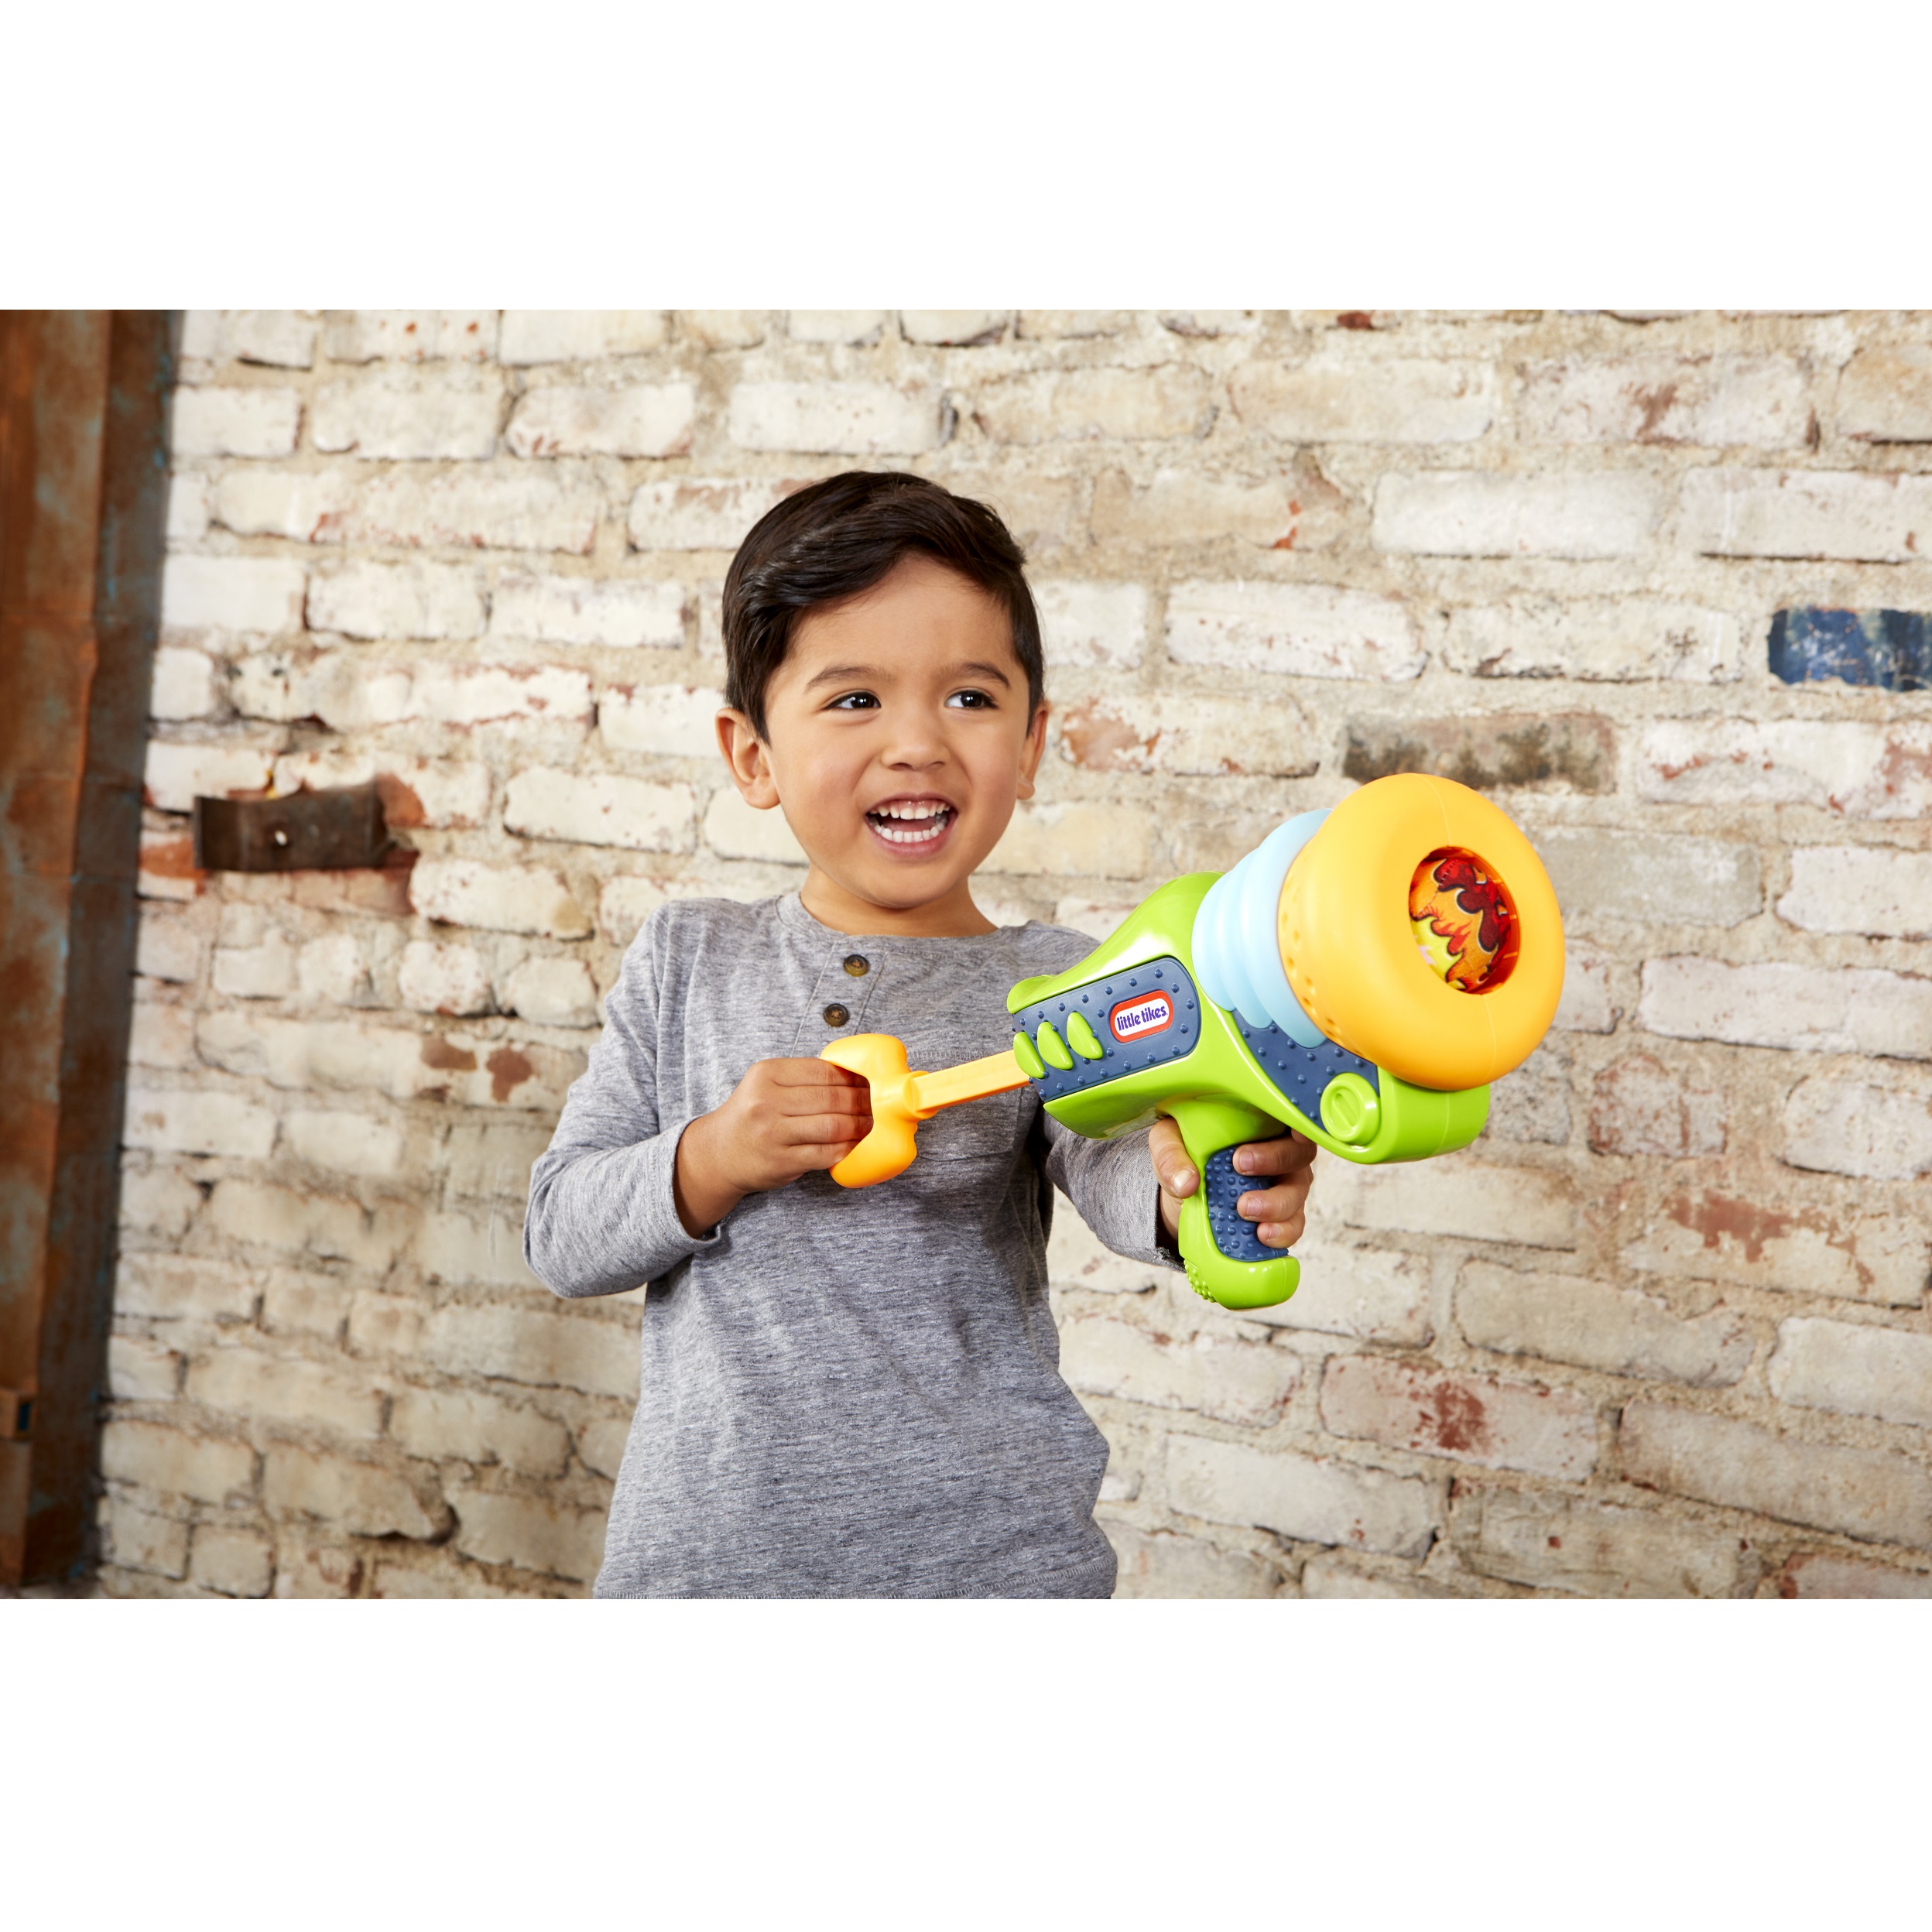 Little Tikes 651250 Mighty Blasters Boom Blaster Toy Blaster with 3 Soft Power Pods - image 4 of 6